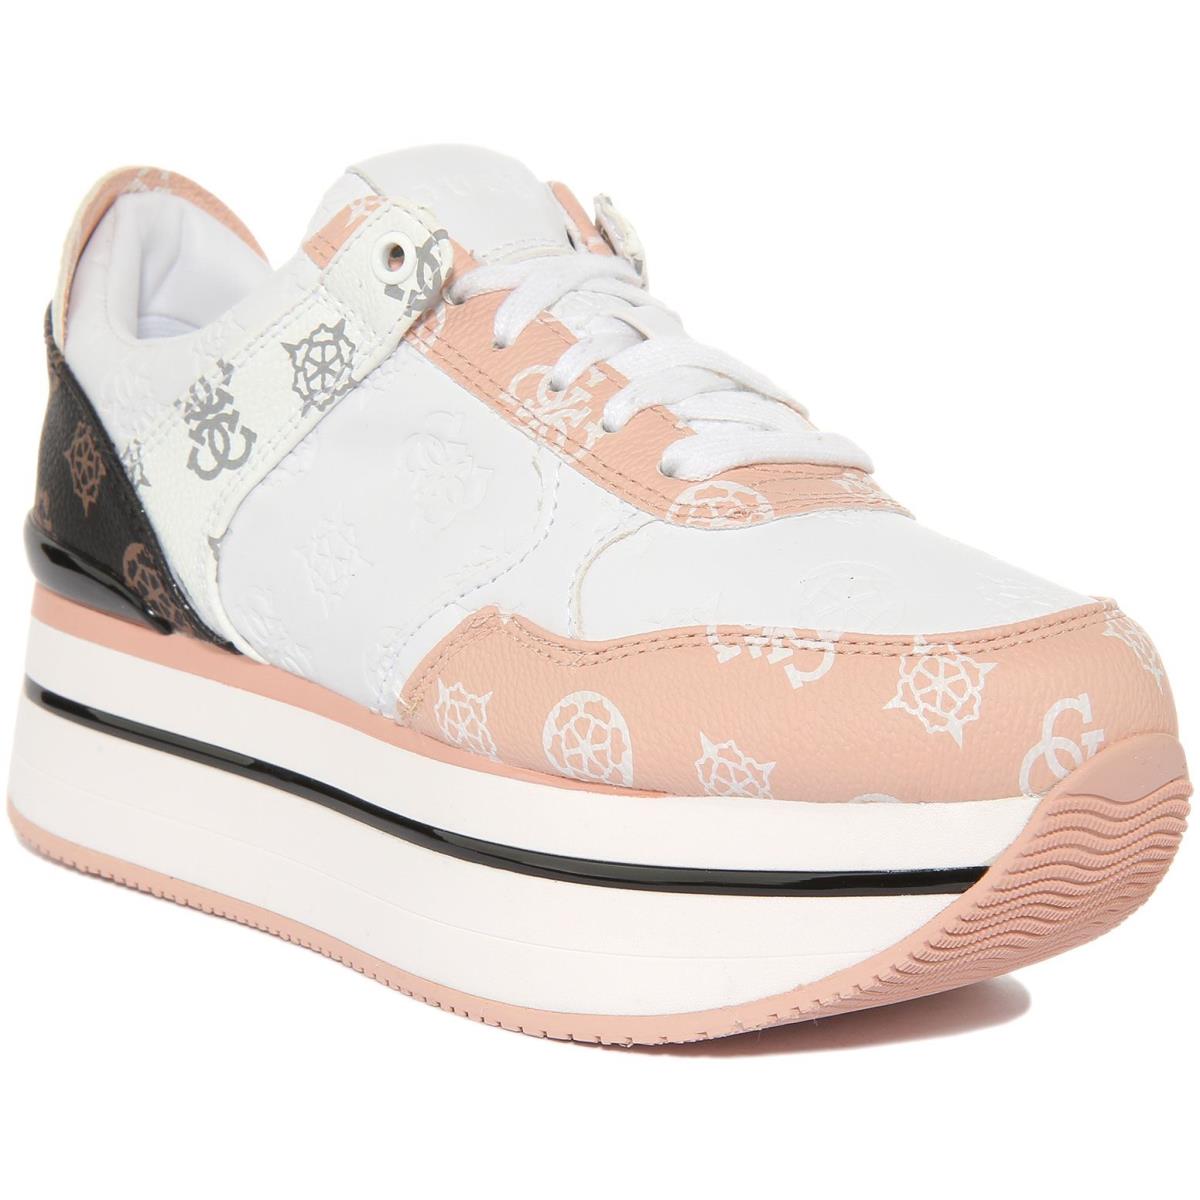 Guess Fl5Hidfal12 Hindle Womens Platform Sneakers In White Pink Size US 5 - 11 WHITE PINK